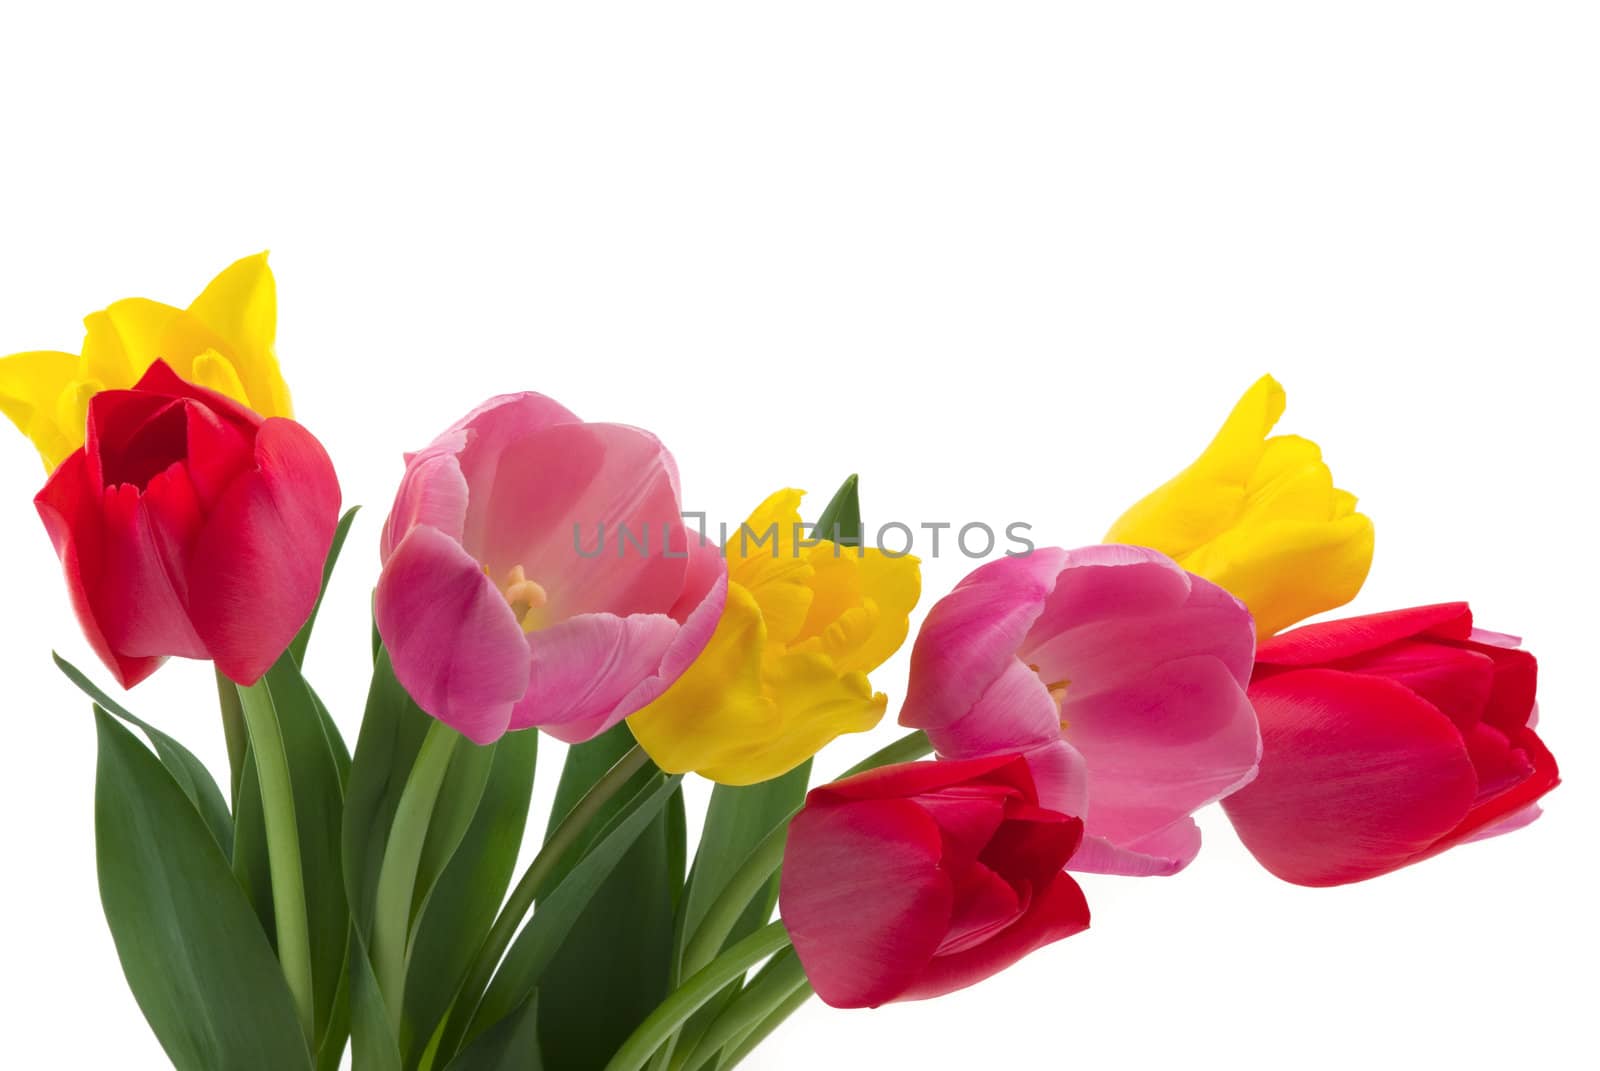 Tulips by BVDC